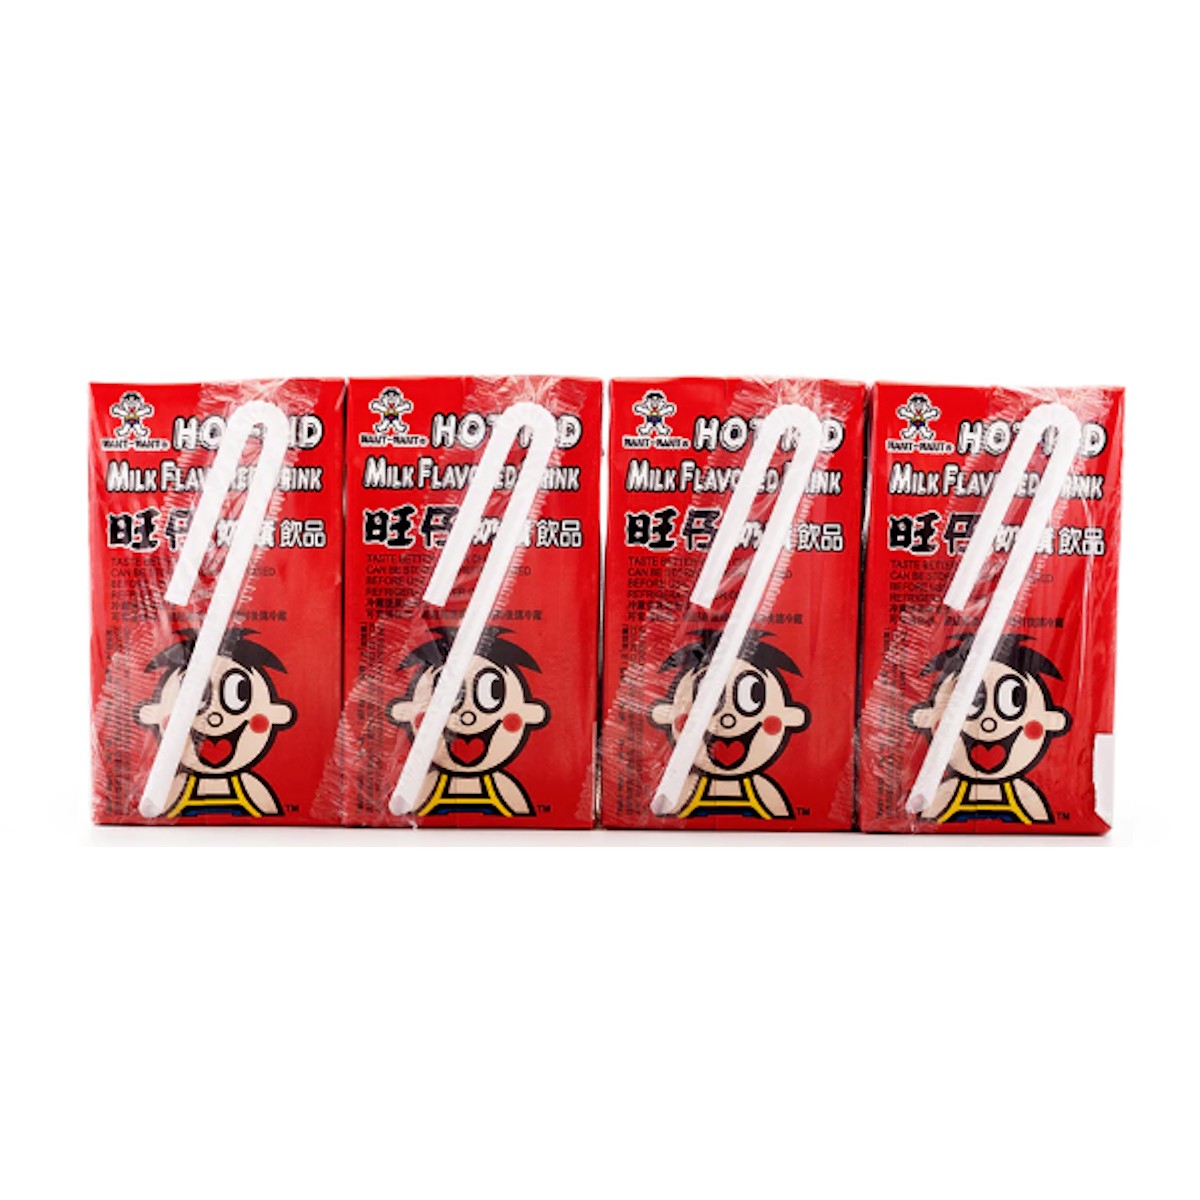 Want-Want Milk Flavored Drink 125ml*4 pack 500 ml